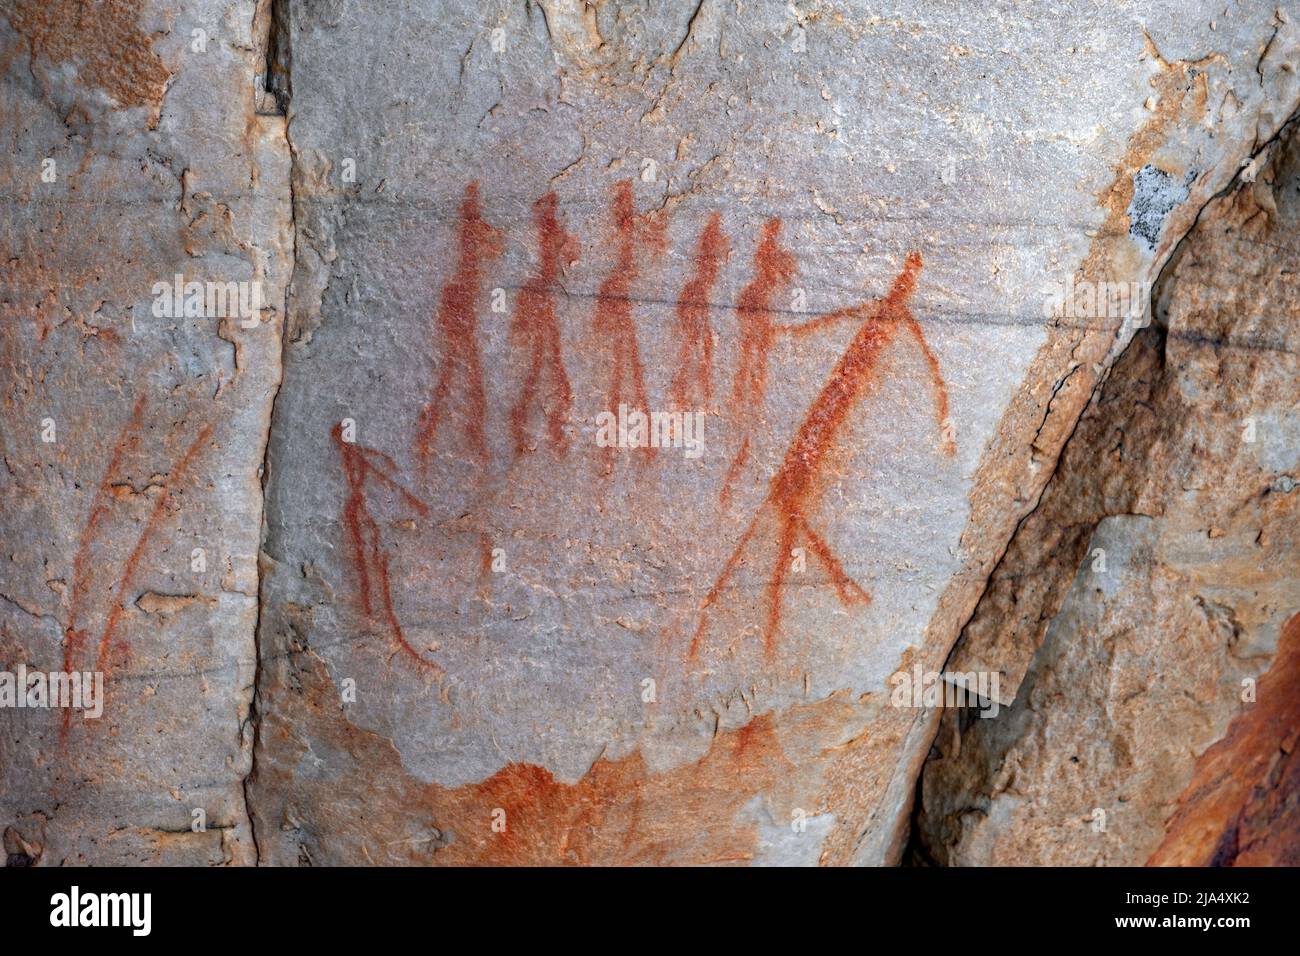 San rock art Bushmen painting at Truitjieskraal in the Matjiesrivier Nature Reserve east of the Cederberg Wilderness, Western Cape, South Africa Stock Photo